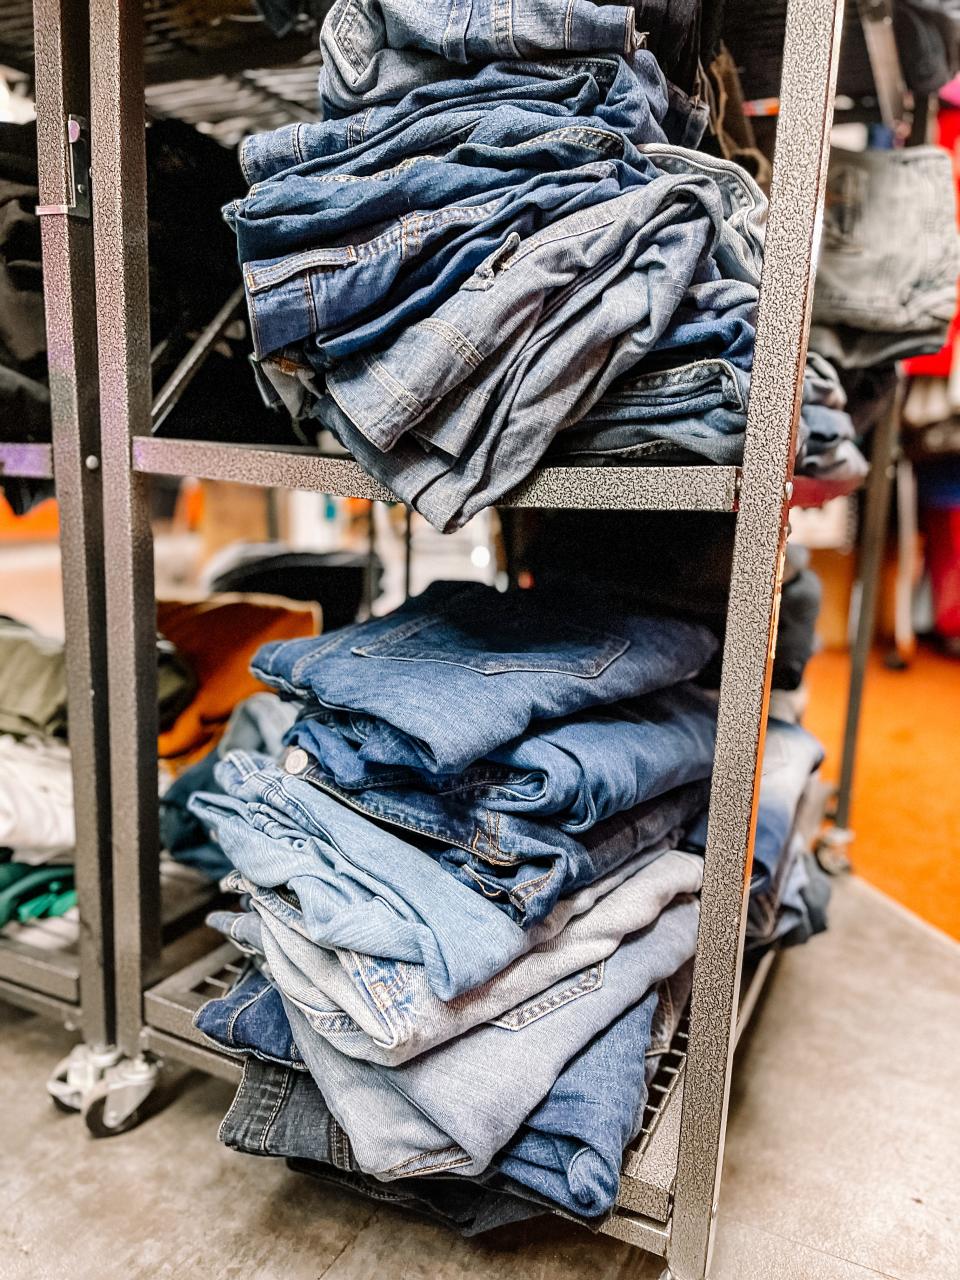 Just a small section of the jeans available at the Thriftique at the Knox Pride Community Resource Center in South Knoxville, May 23, 2023.